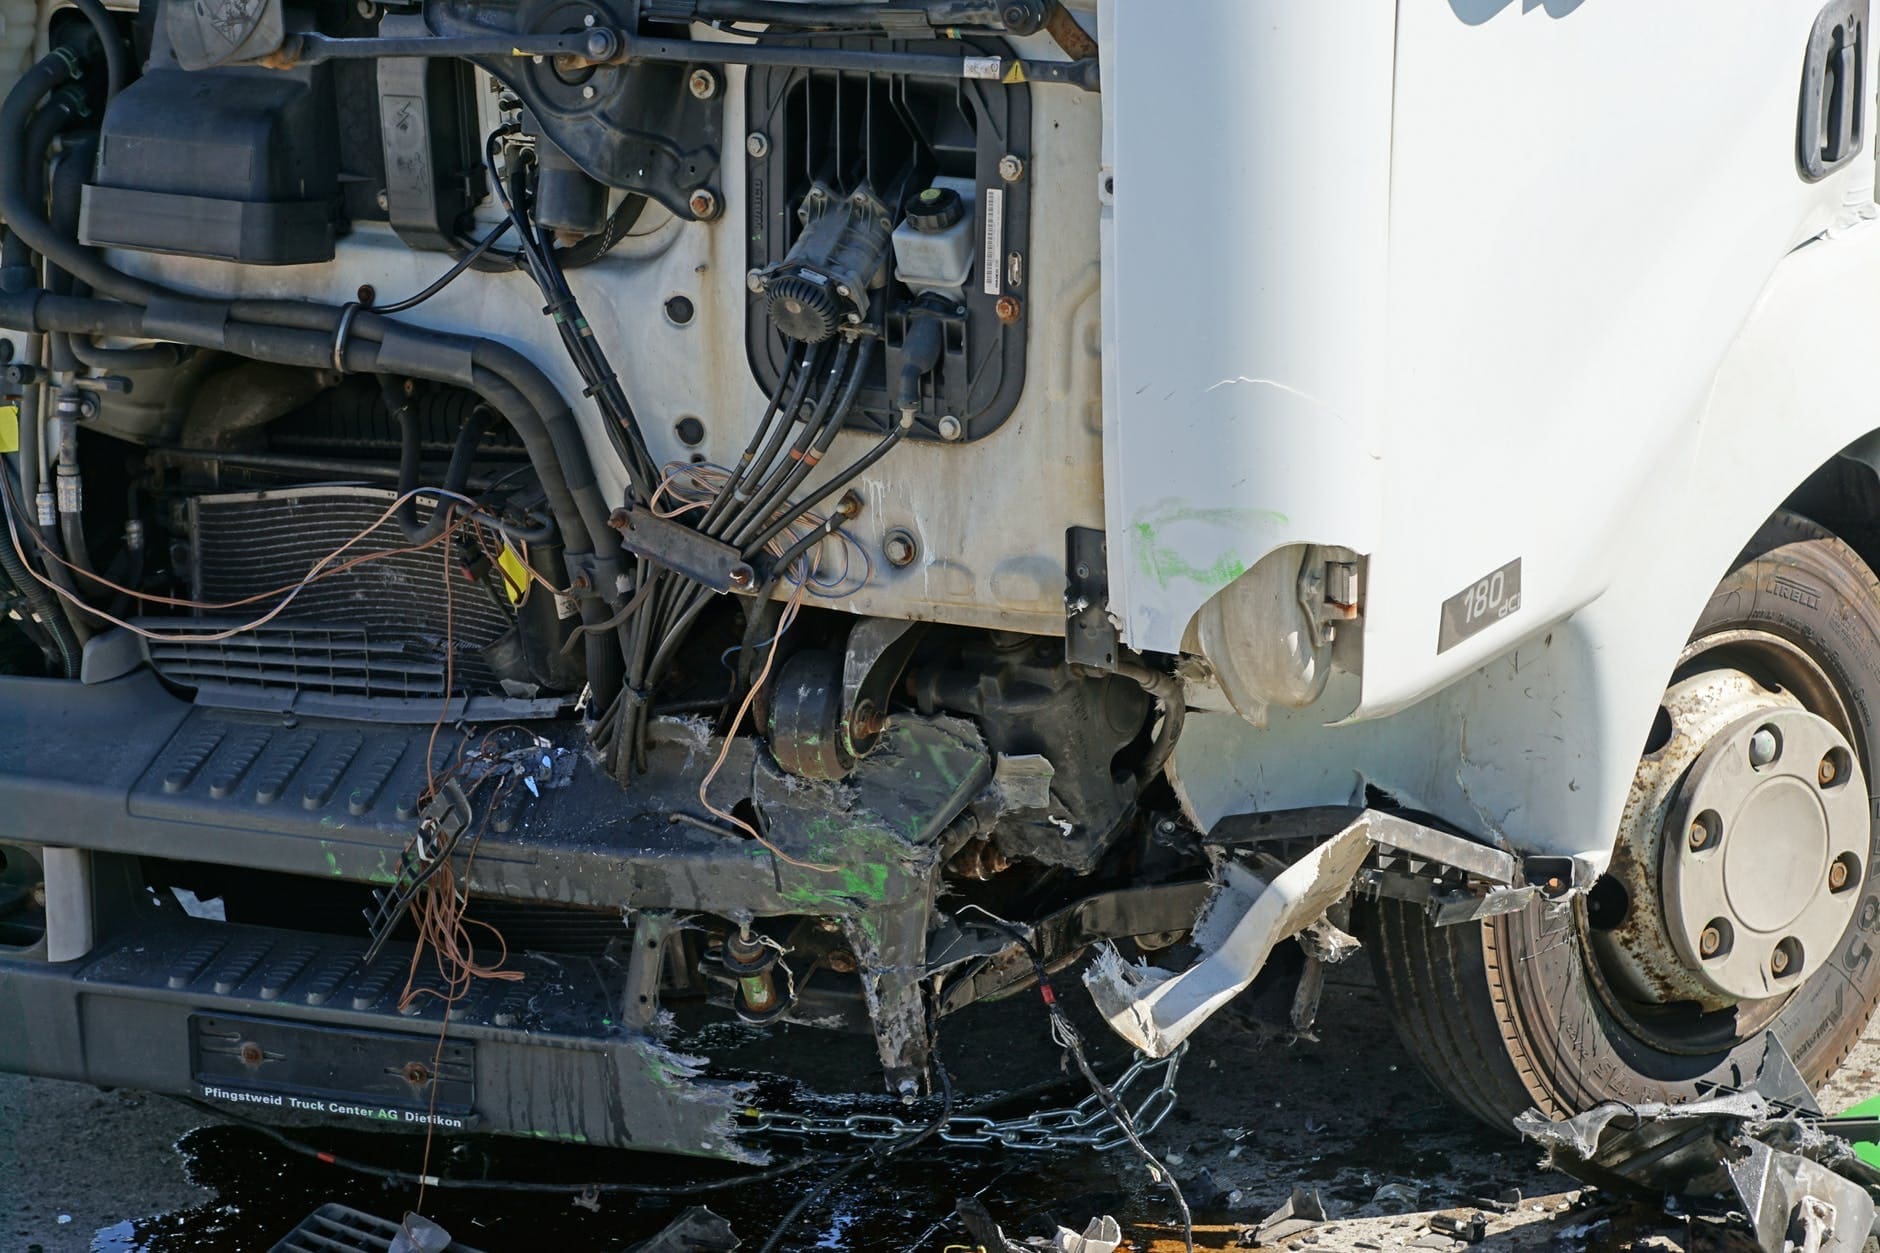 Truck accident damage